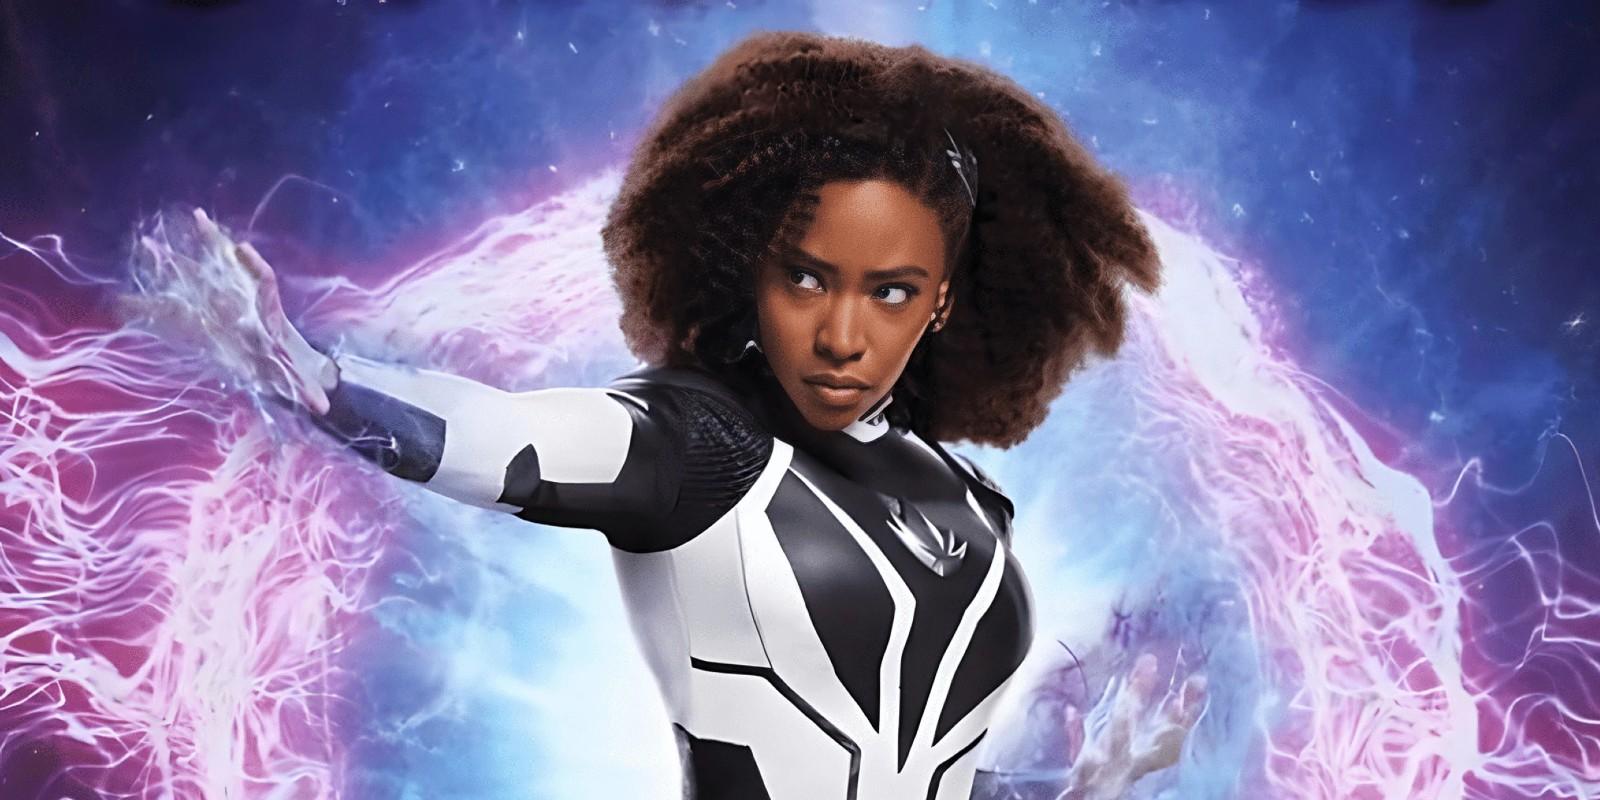 Teyonah Parris as Monica Rambeau using her powers on her The Marvels poster.